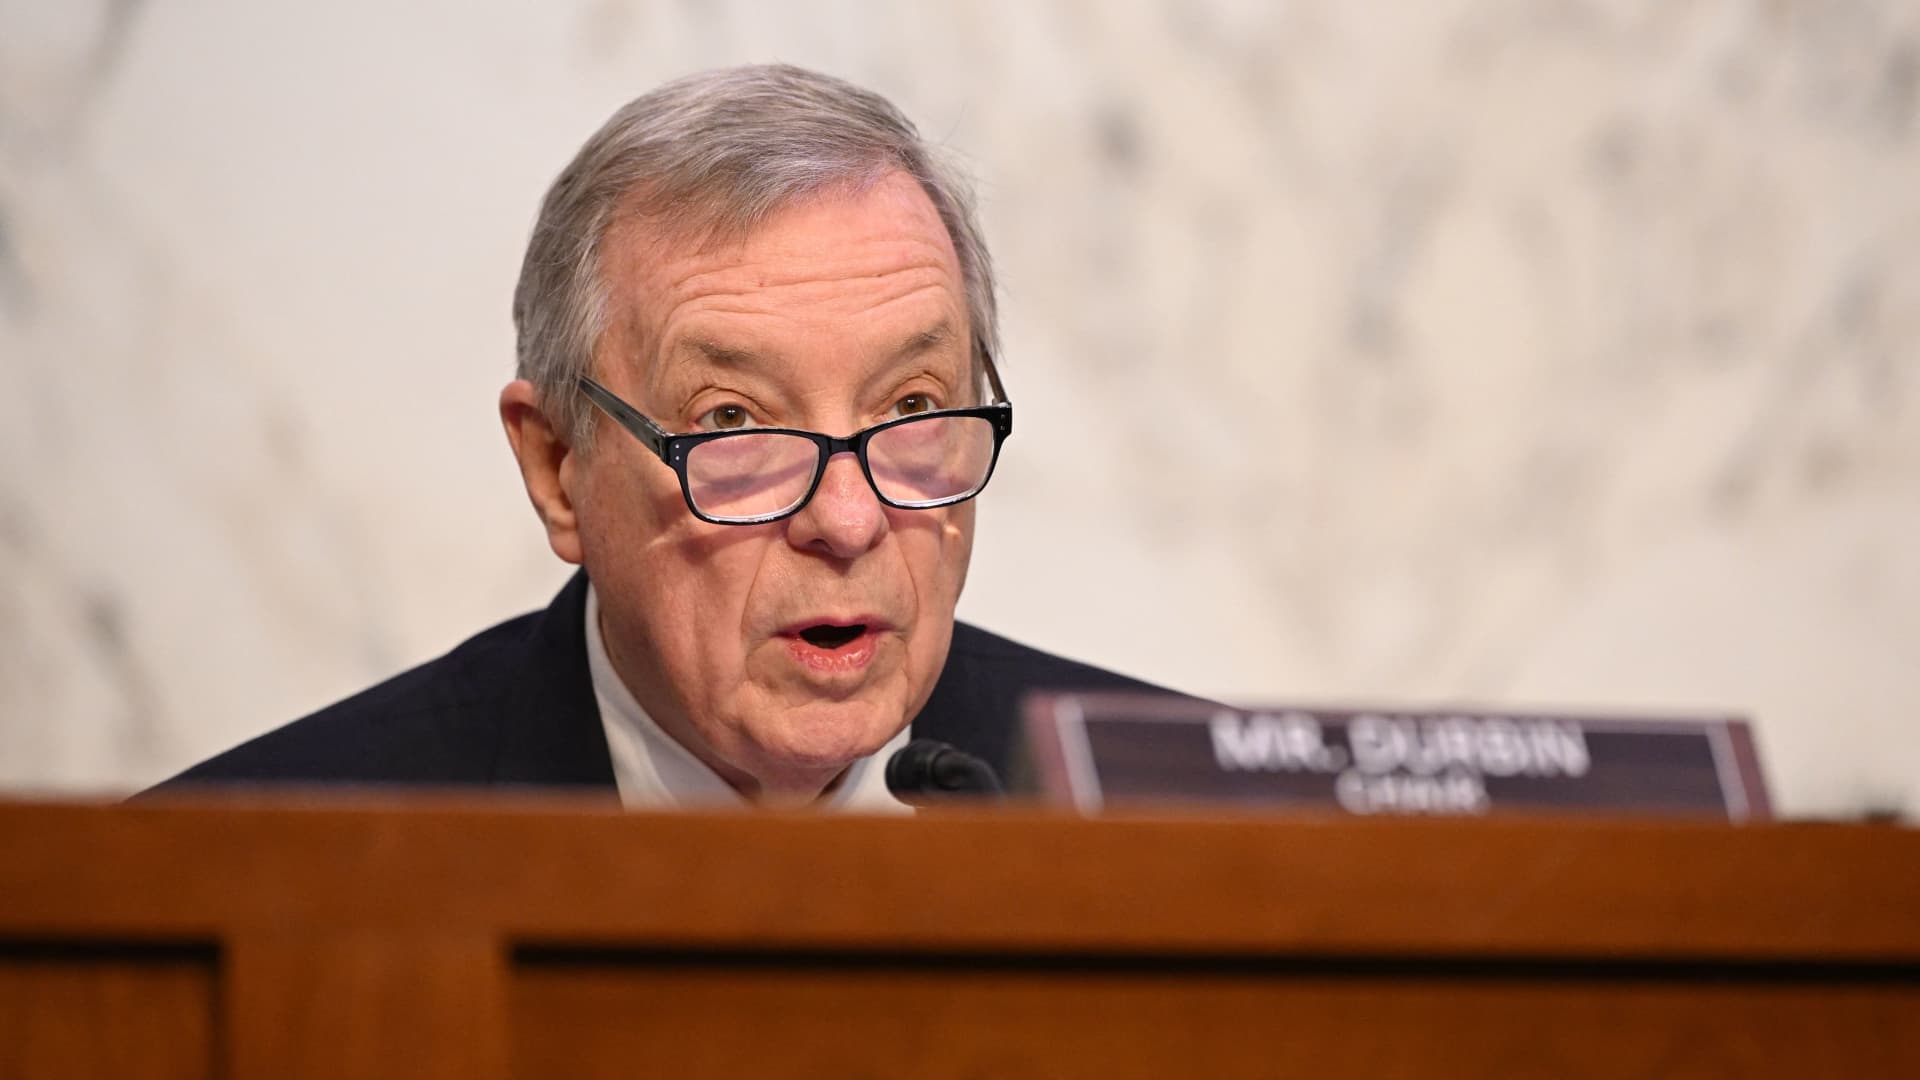 Chairman Dick Durbin (D-IL) speaks during a US Senate Judiciary Committee hearing regarding Supreme Court ethics reform, on Capitol Hill in Washington, DC, on May 2, 2023.